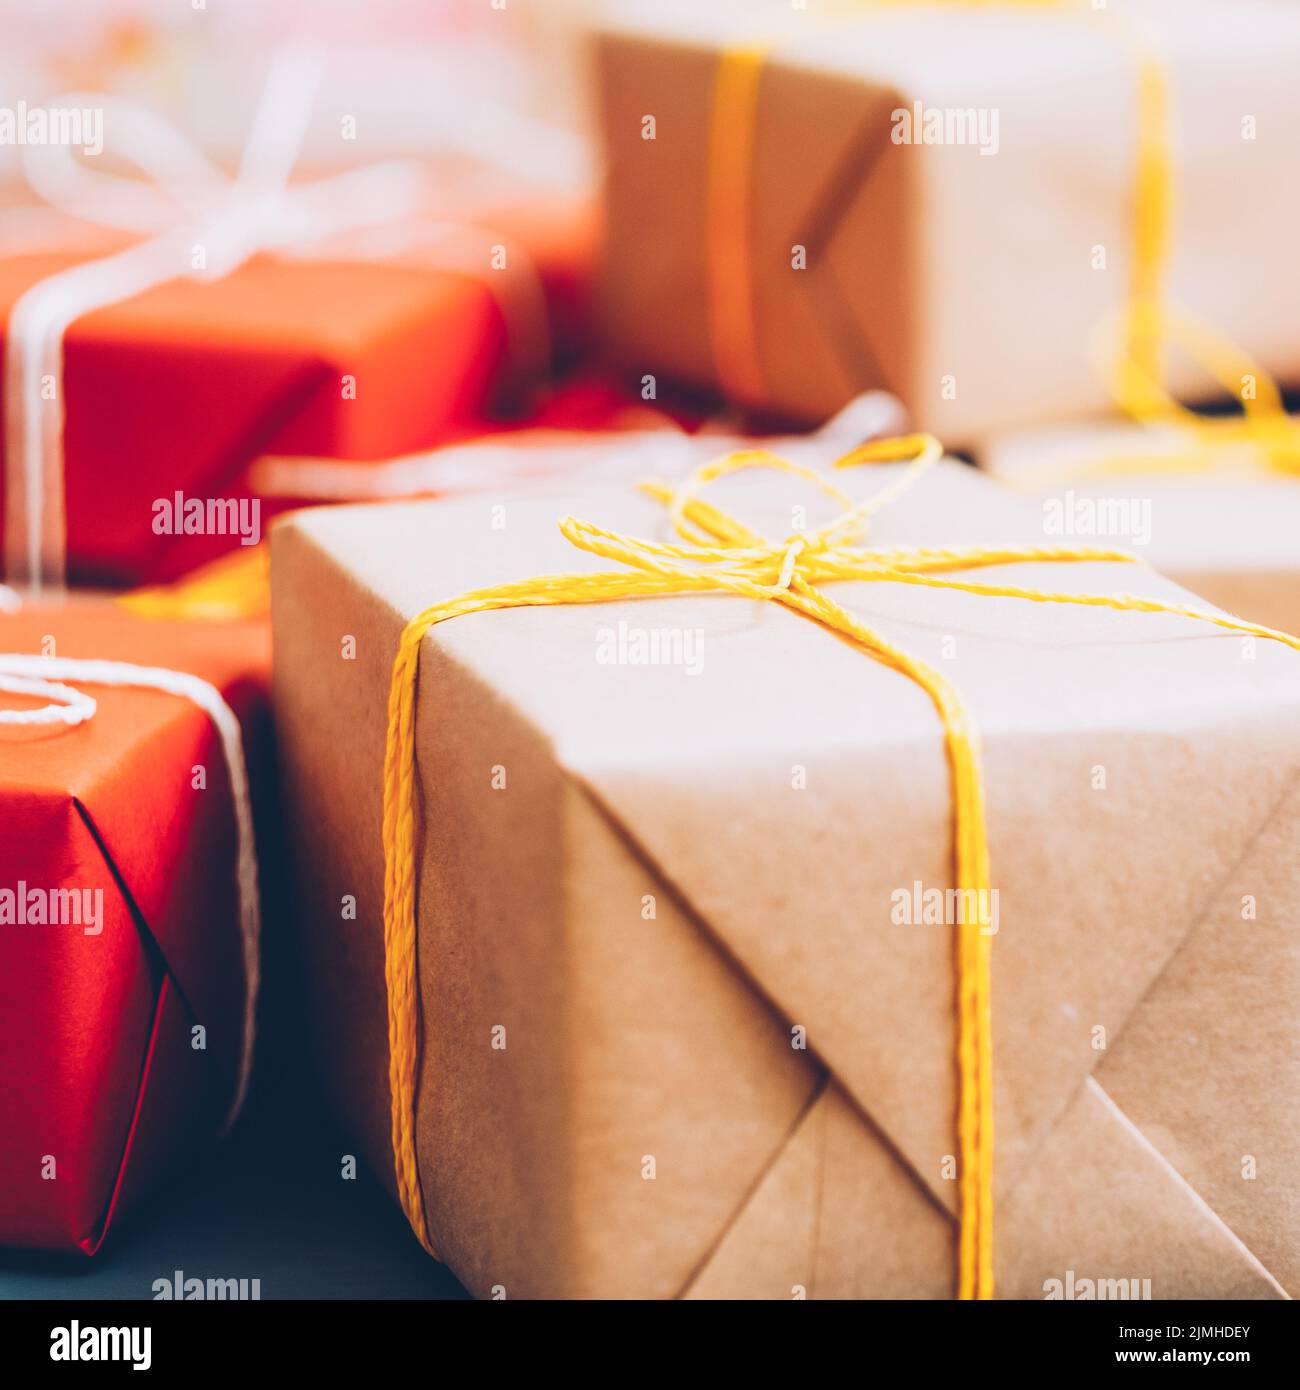 holiday shopping sale beige red gift boxes pile Stock Photo